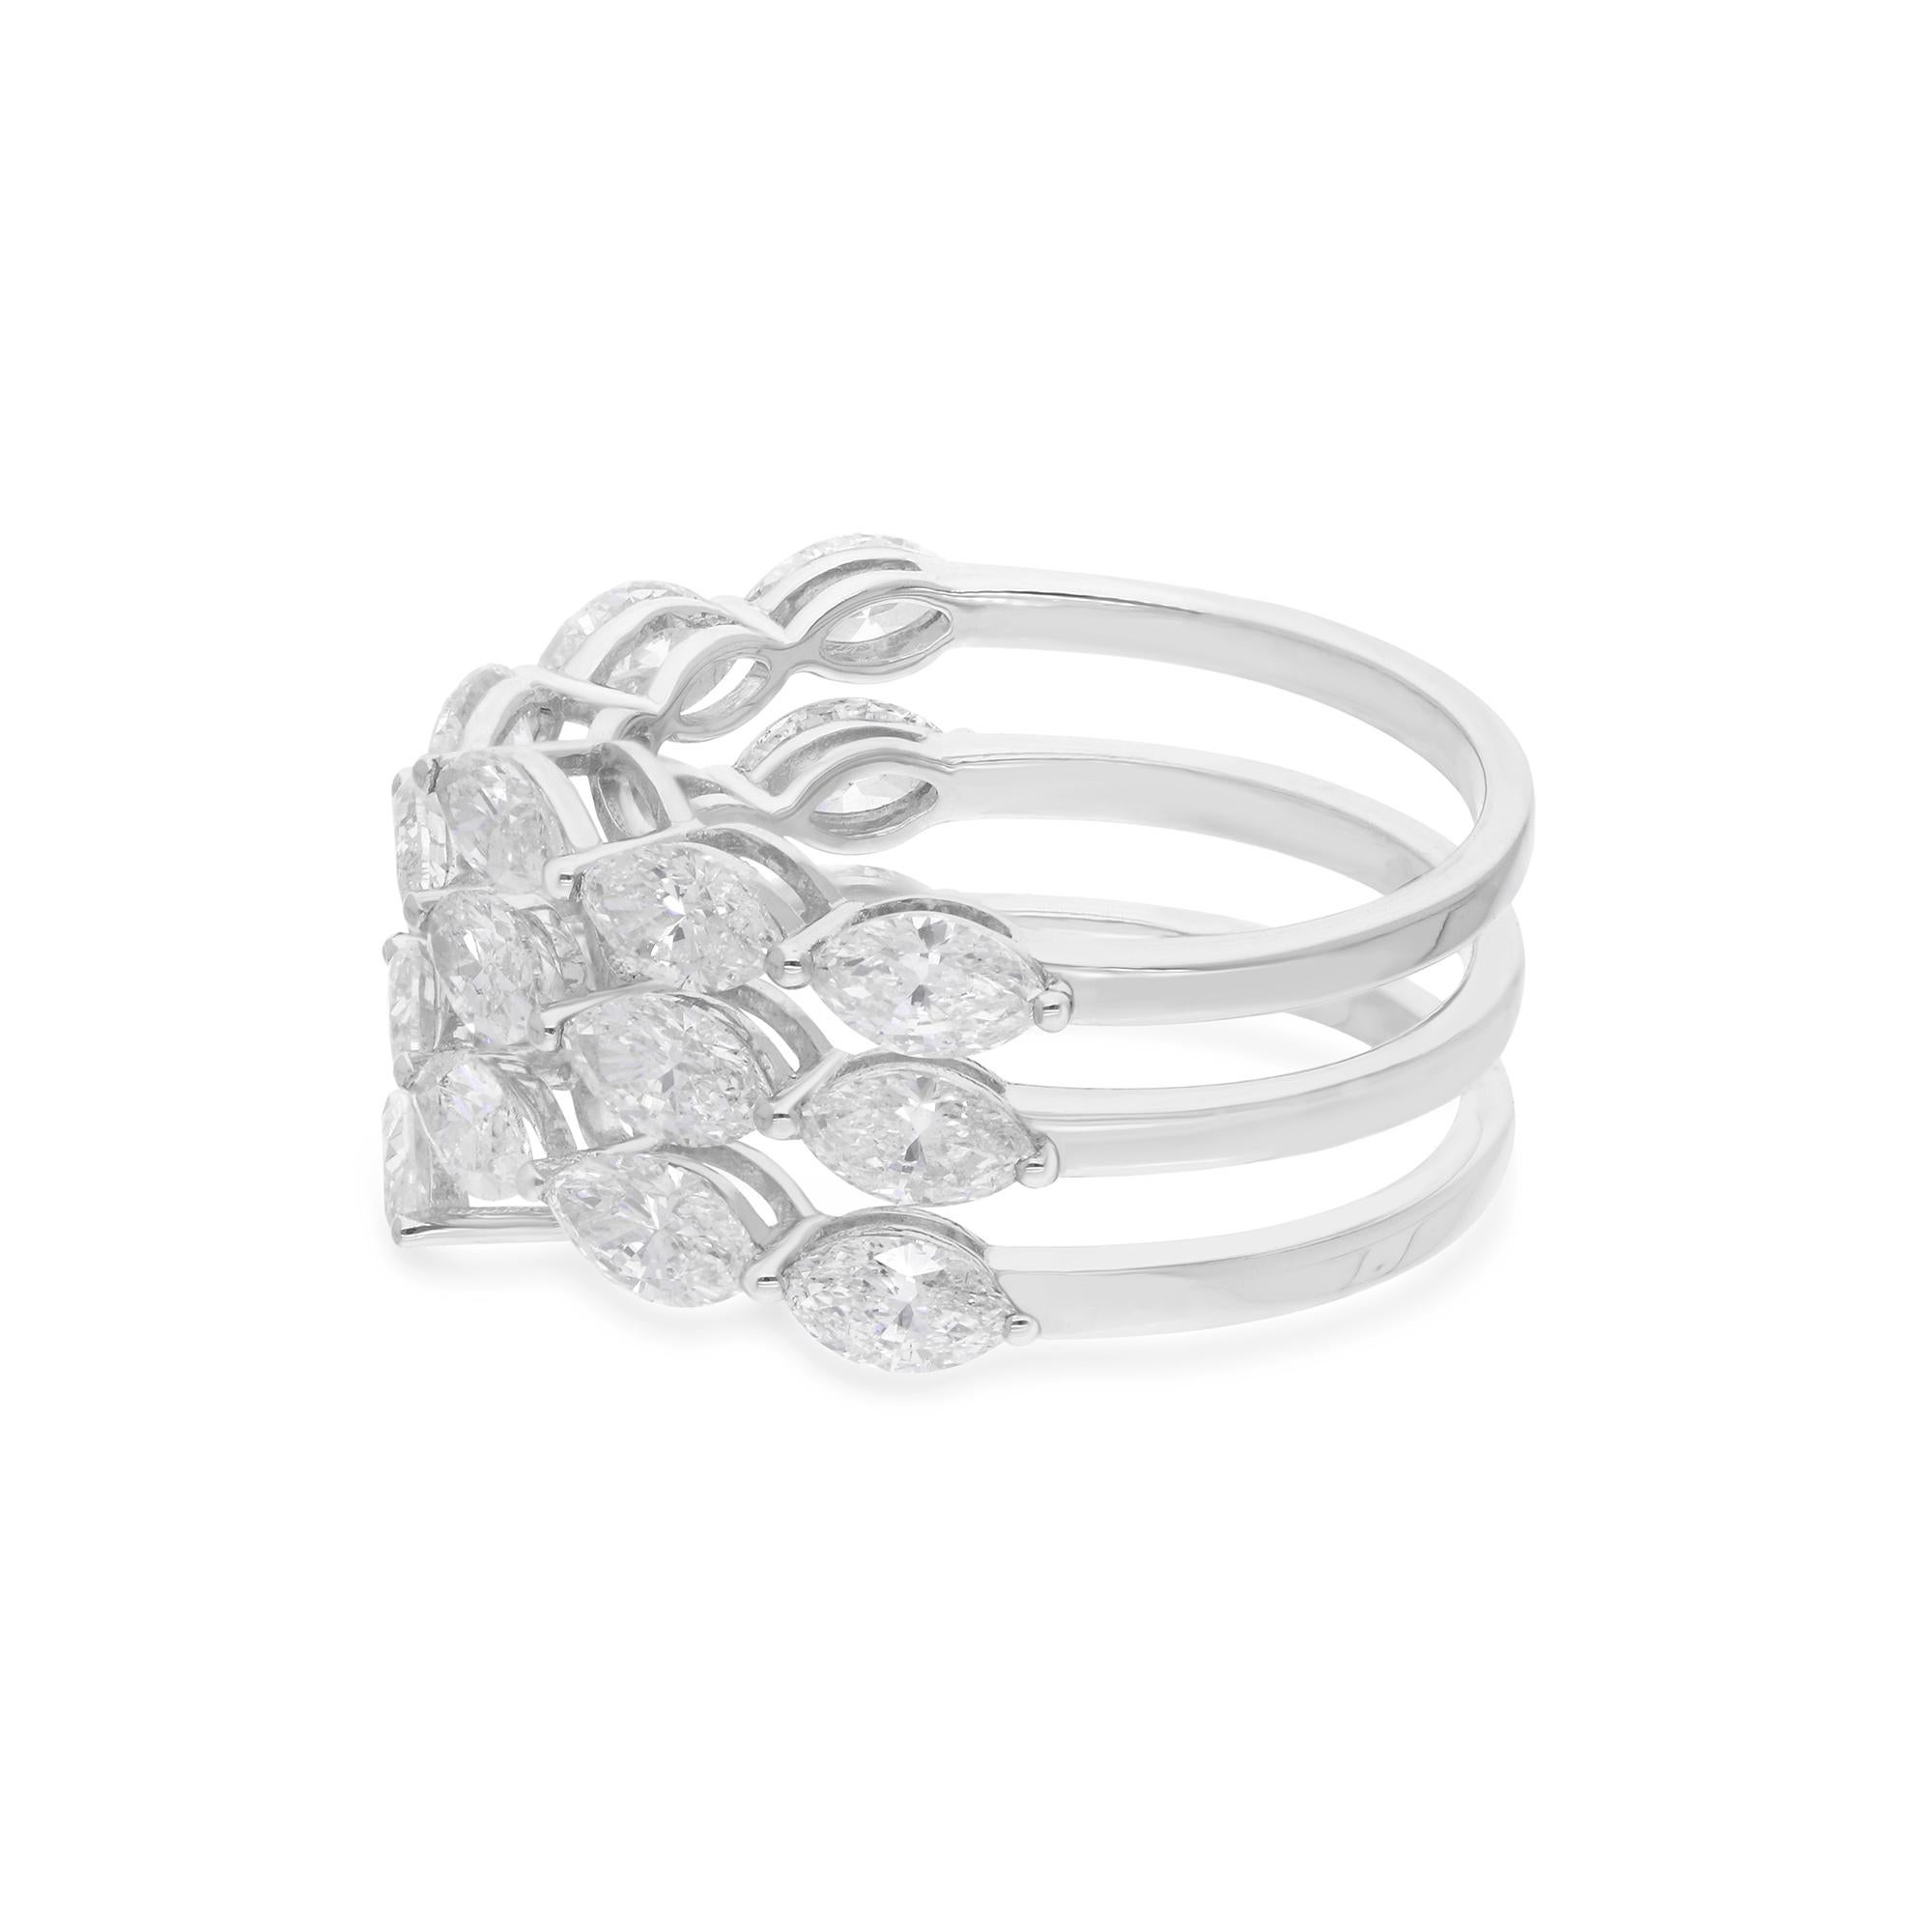 The spiral design of the ring adds a modern twist to its classic elegance, creating a statement piece that is sure to turn heads and command attention. Whether worn as a symbol of love and commitment or as a glamorous accessory for special